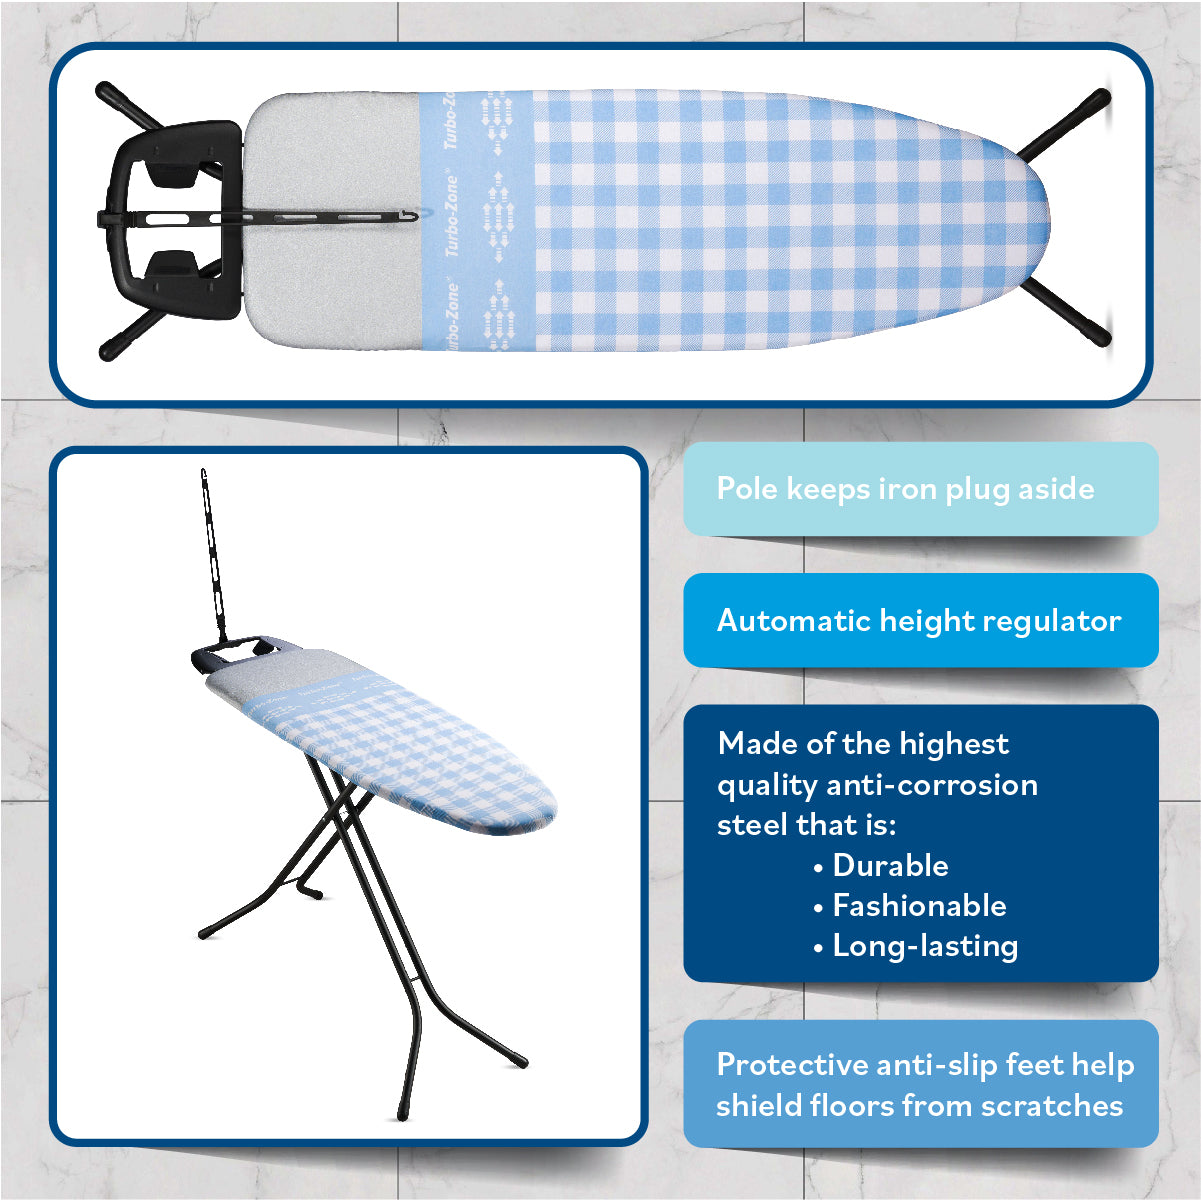 Bartnelli Heavy Duty Ironing Board 48x15 | Designed & Made in Europe with Patent Technology, Turbo & Park Zone, Features: 4 Layer Cover &Pad,Height-Adjustable,4 Premium Steel Legs,Upgraded Iron Rest (BLUE,WHITE CHECKERED)